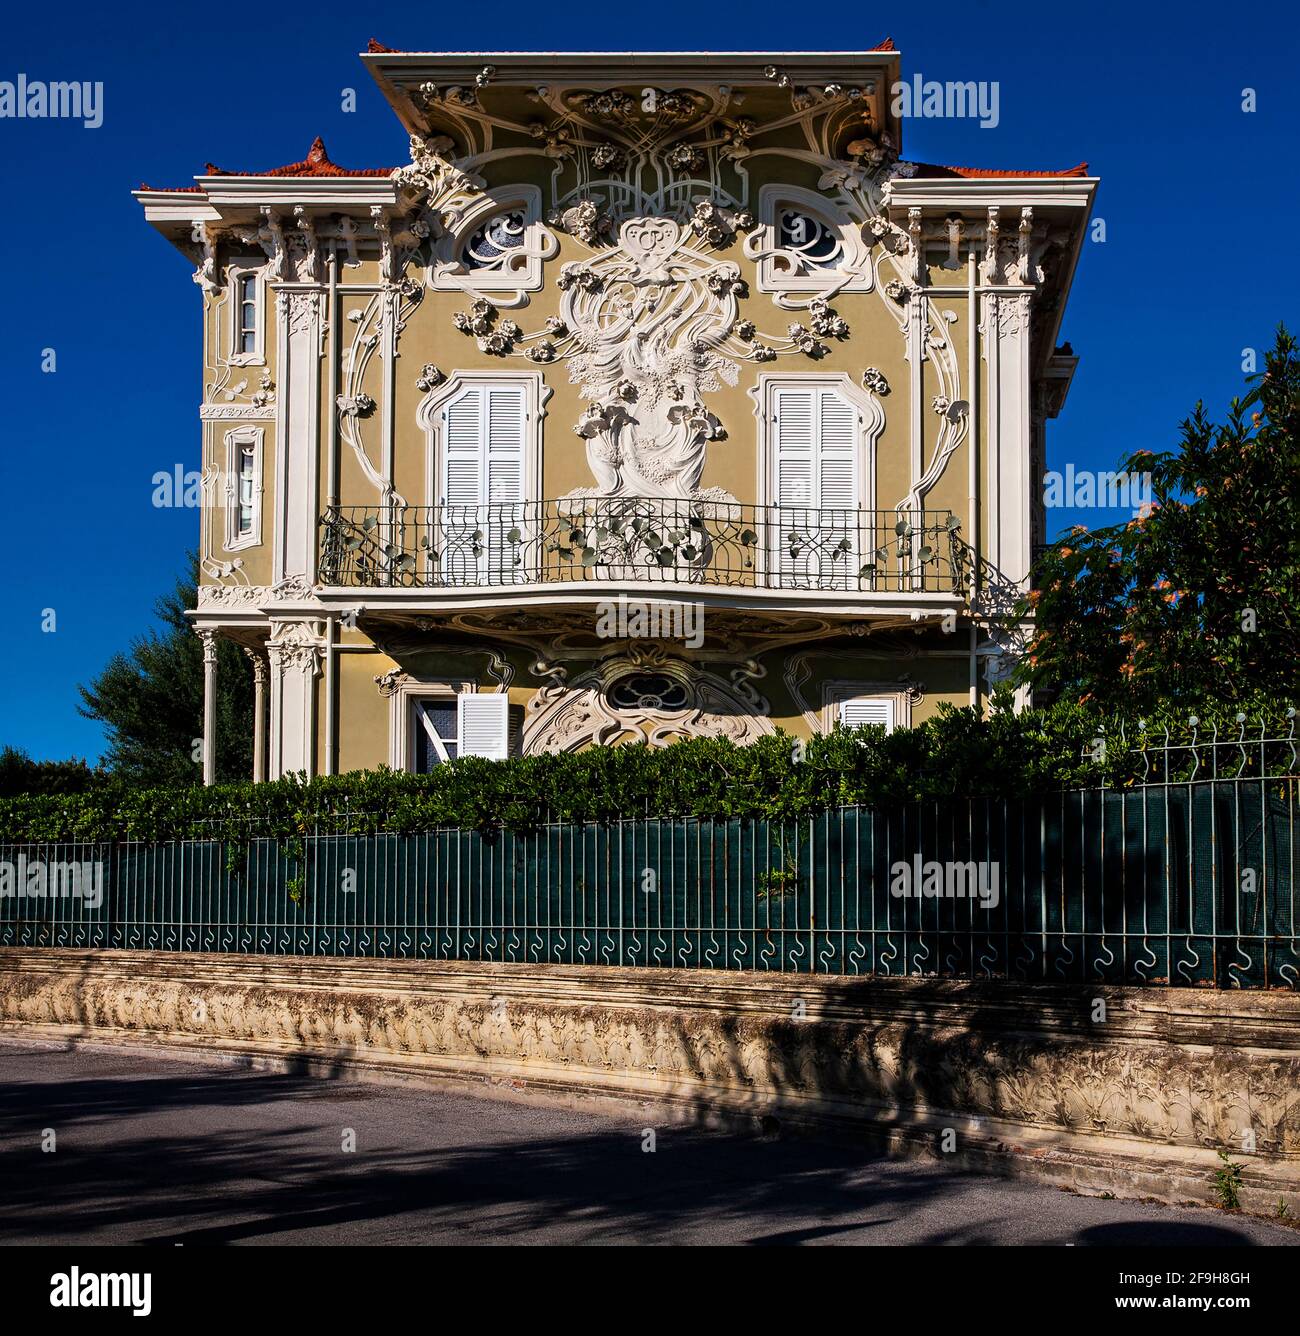 The Villino Ruggeri is a Liberty style villa located in the town of Pesaro in the Marche Provence of Italy. Stock Photo